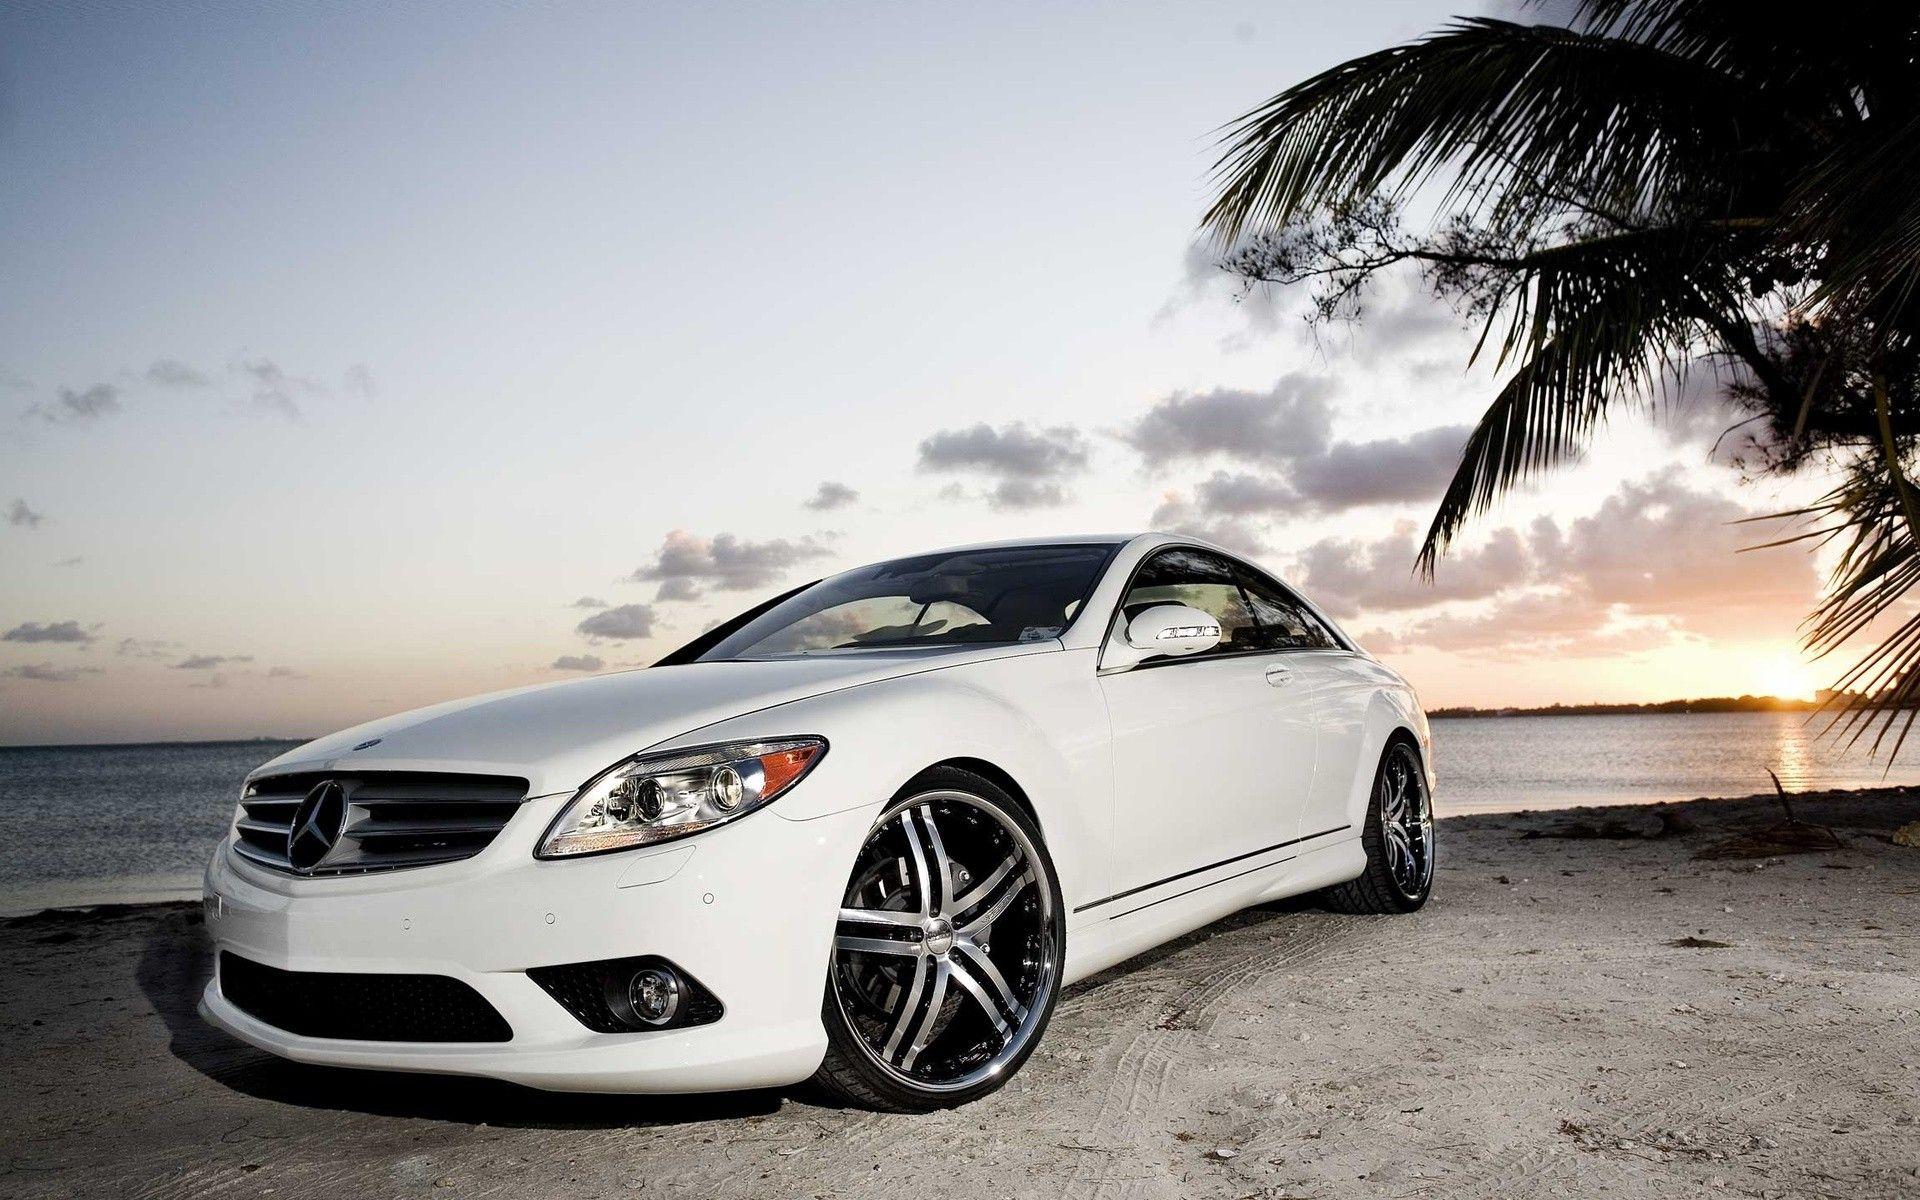 We Provide HD Benz Car Wallpaper For Desktop free for your computer